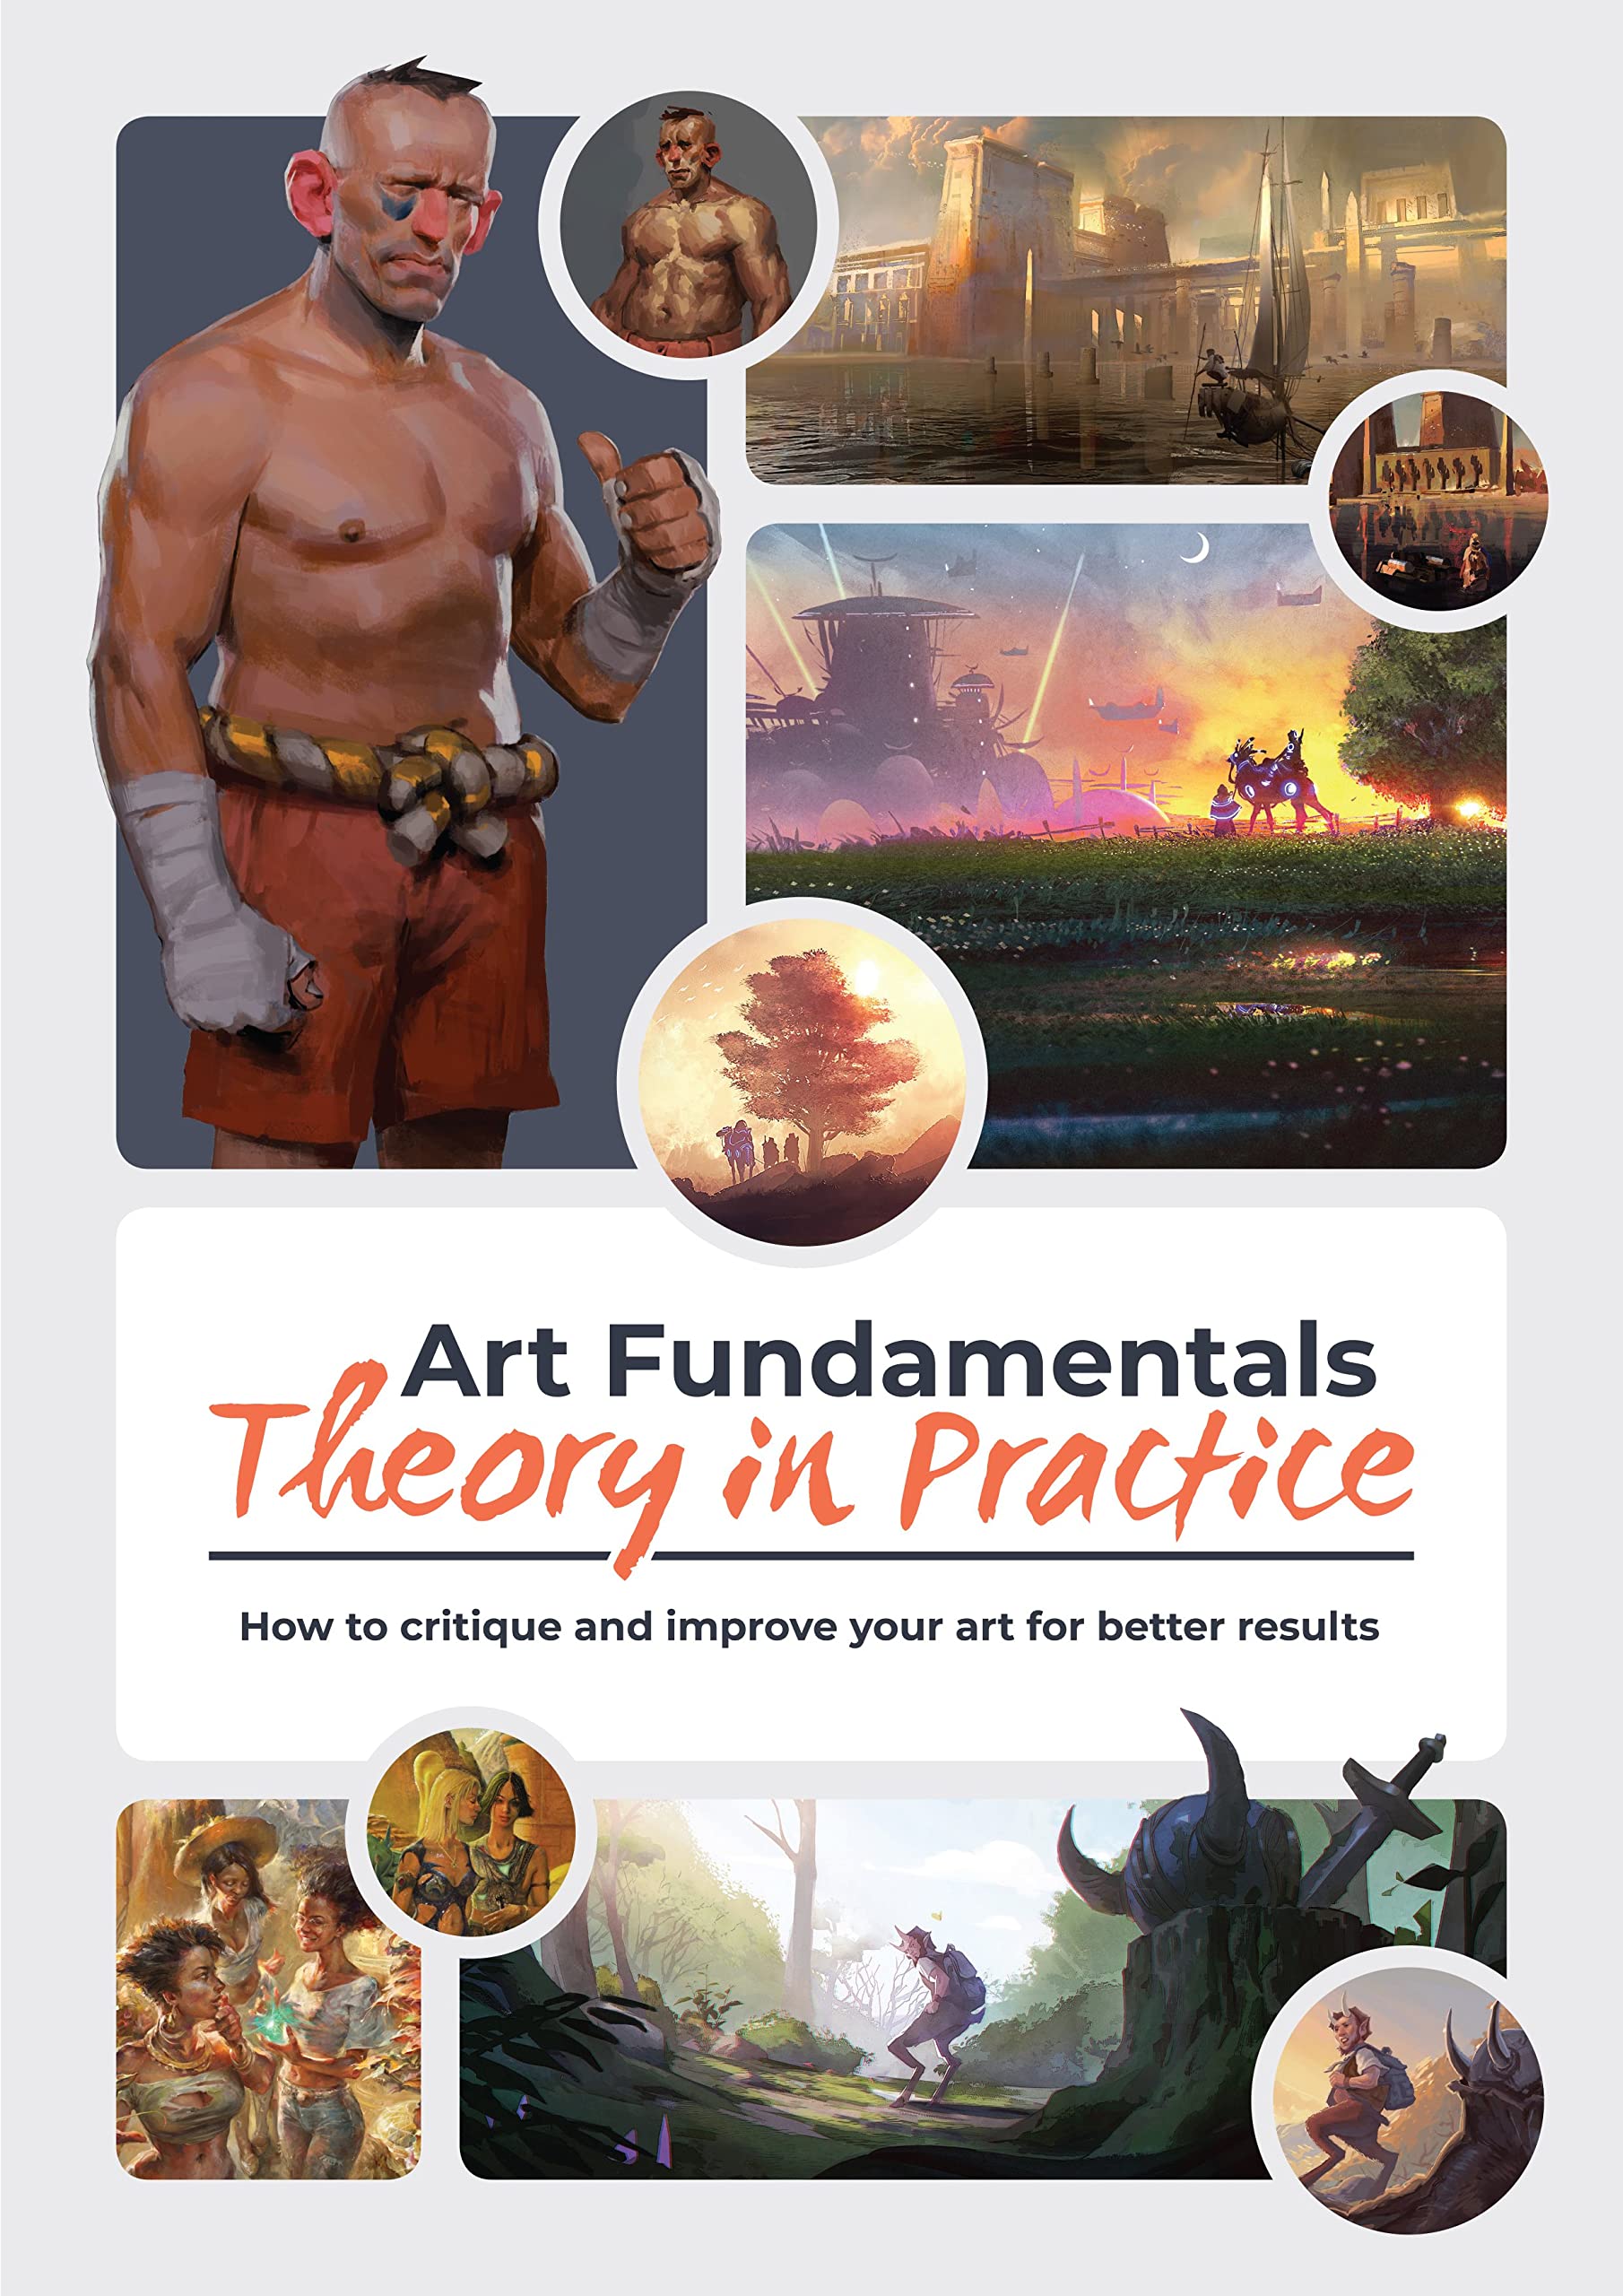 Art Fundamentals - Theory in Practice